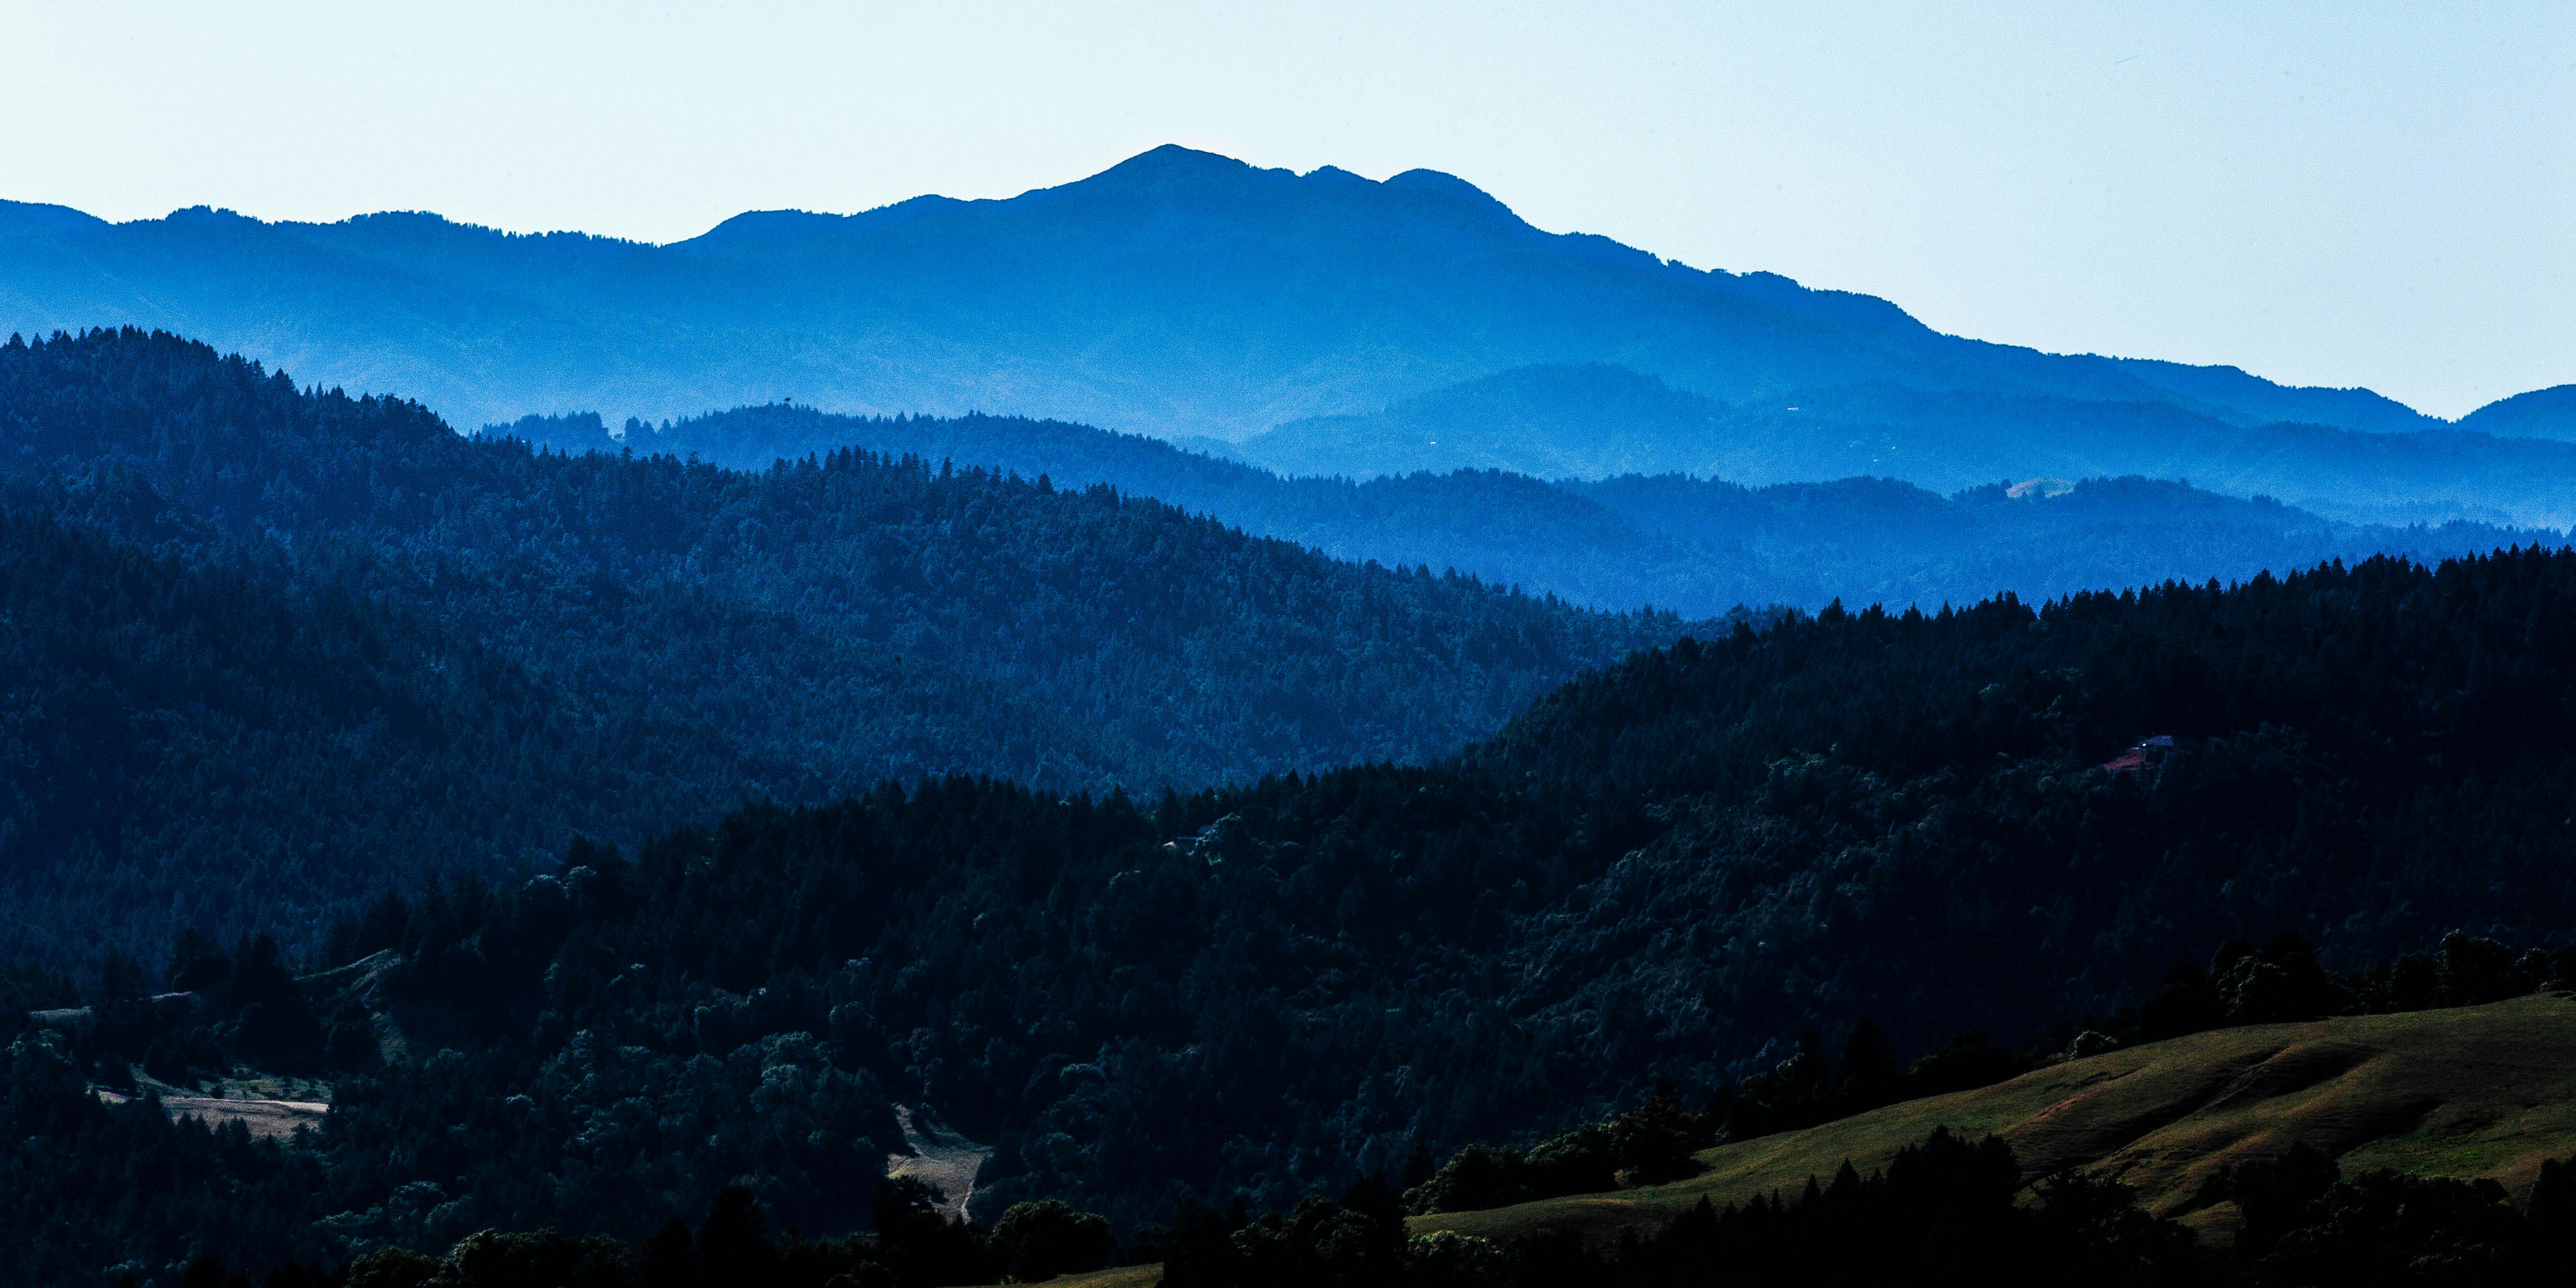 The rolling mountains of Humboldt County, CA on May 12, 2018. Human trafficking in Humboldt continues to be a problem as the region is so vast.